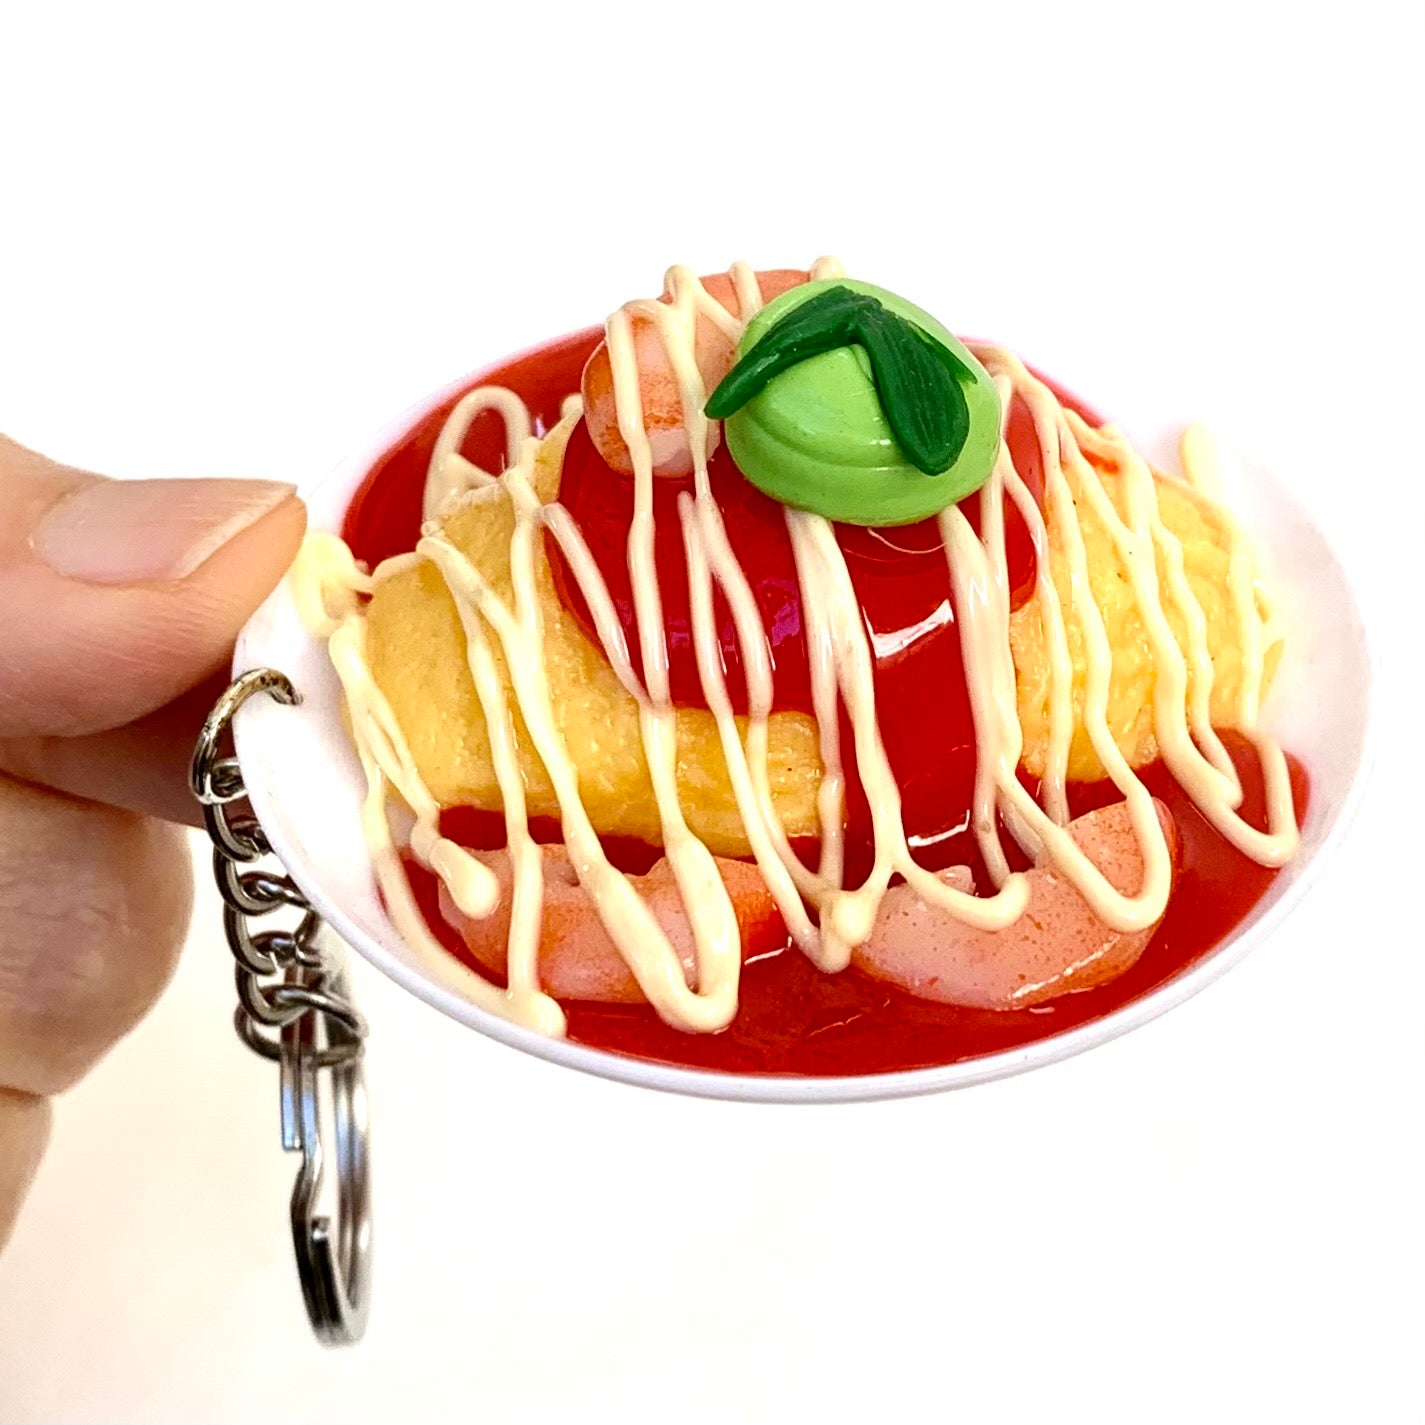 X 83043 OMURICE JAPANESE OMELETTE RICE KEY CHARM-DISCONTINUED